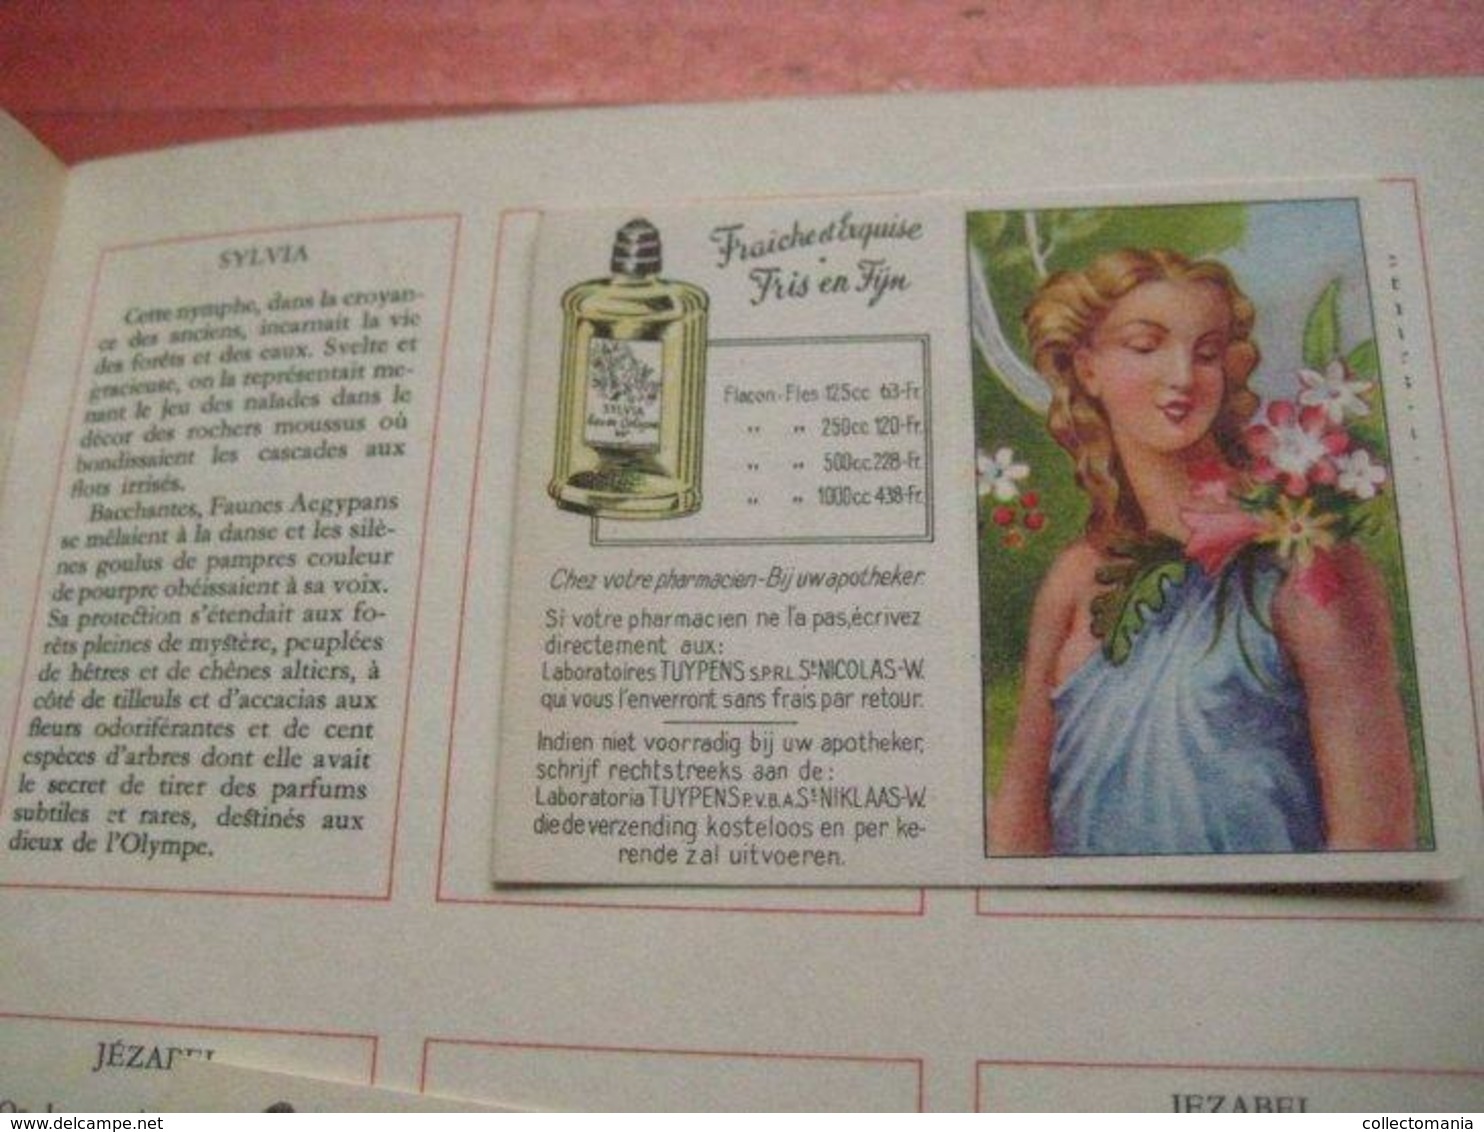 1 album Laboratoires TUYPENS , 1950'sRare & nice, woman famous in history, album splendid, only 10 cards to glue in RARE